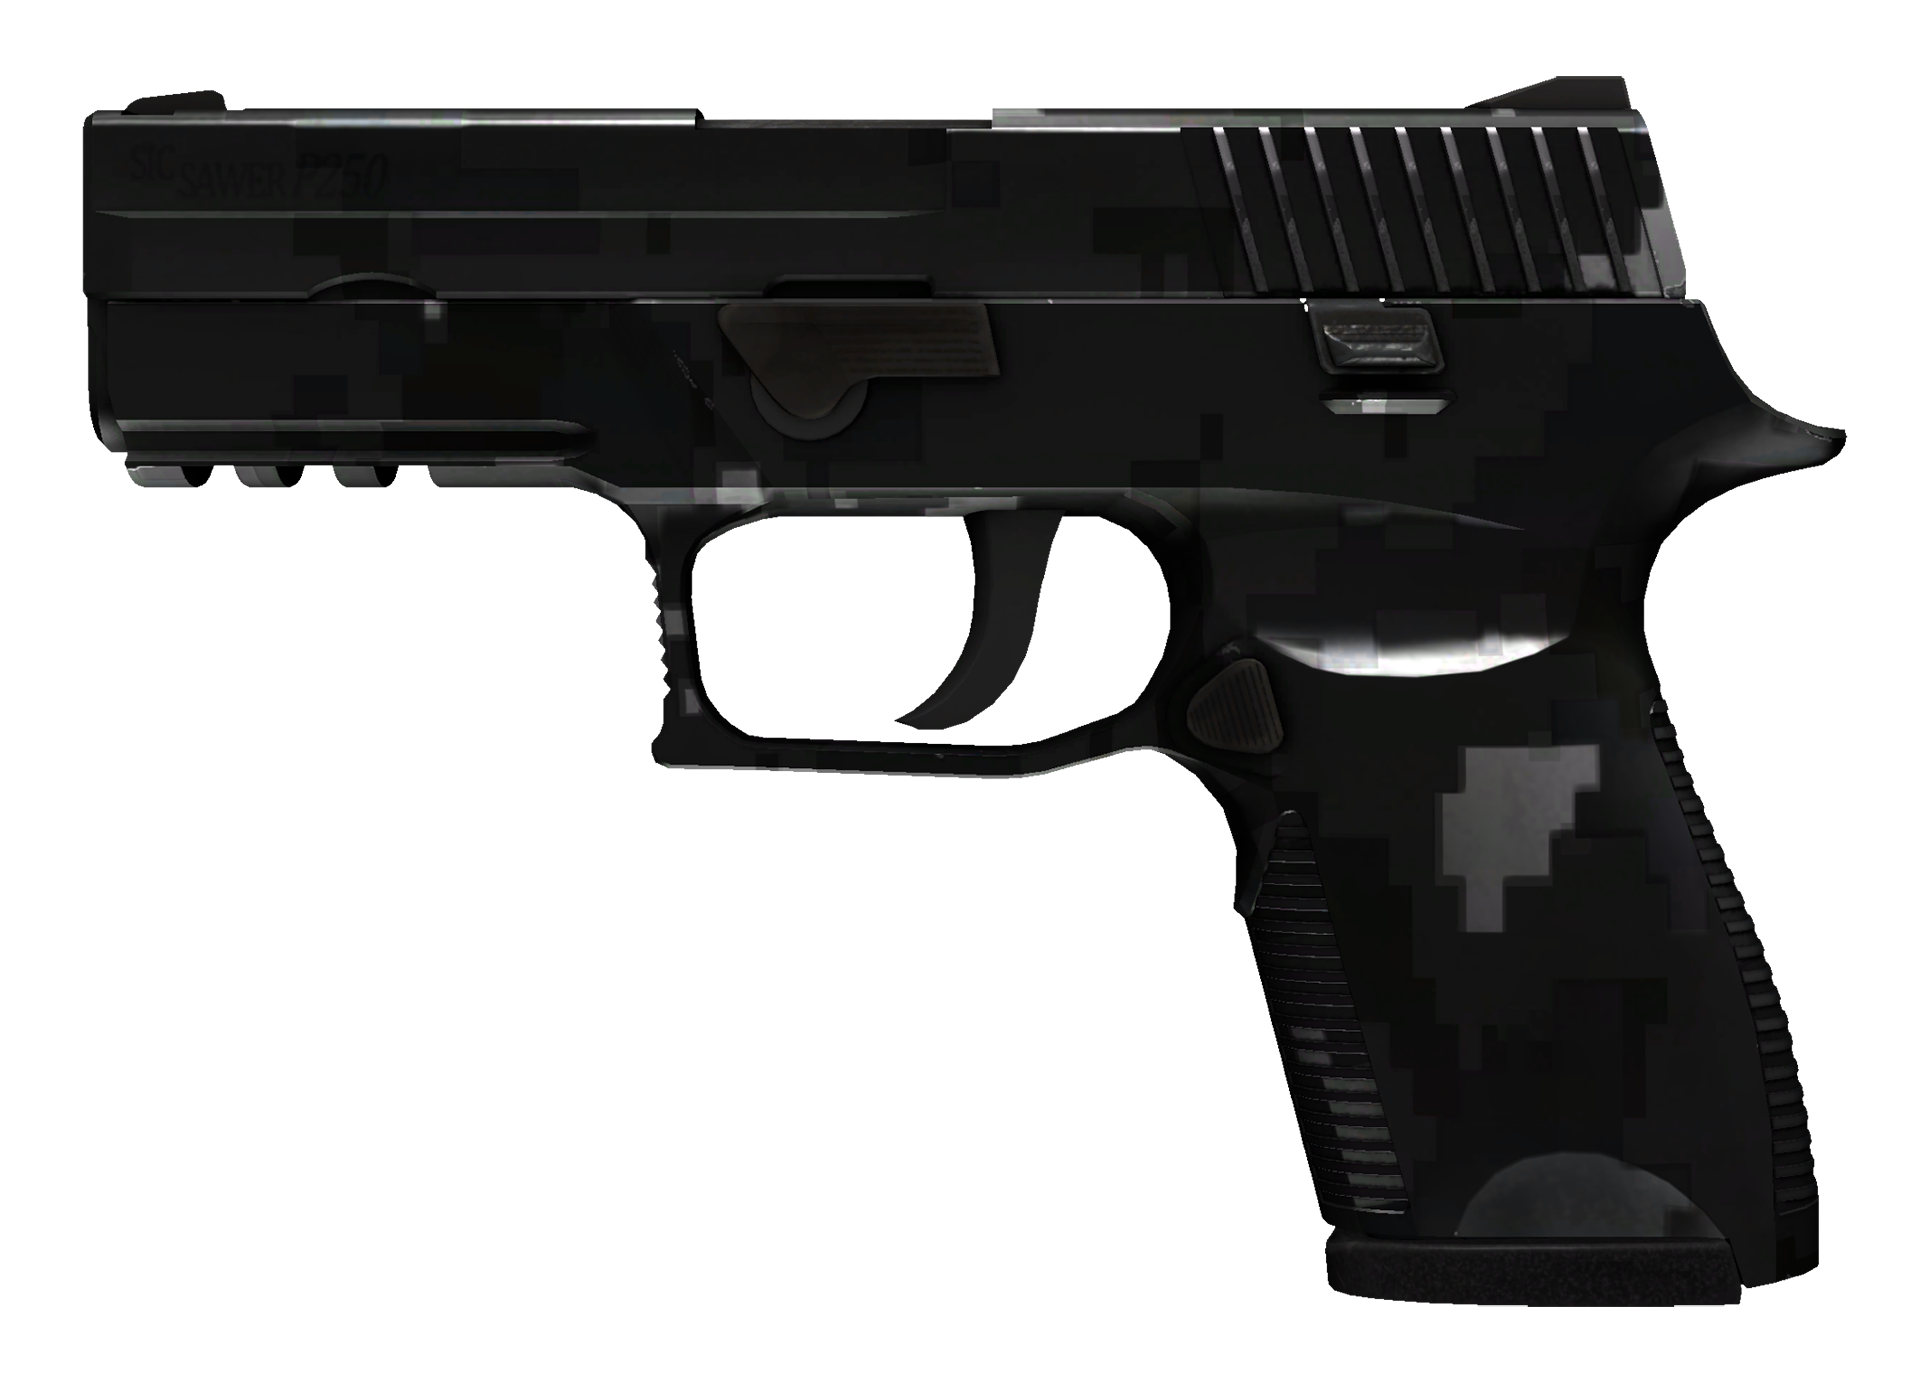 Desert Eagle Urban DDPAT cs go skin download the last version for android